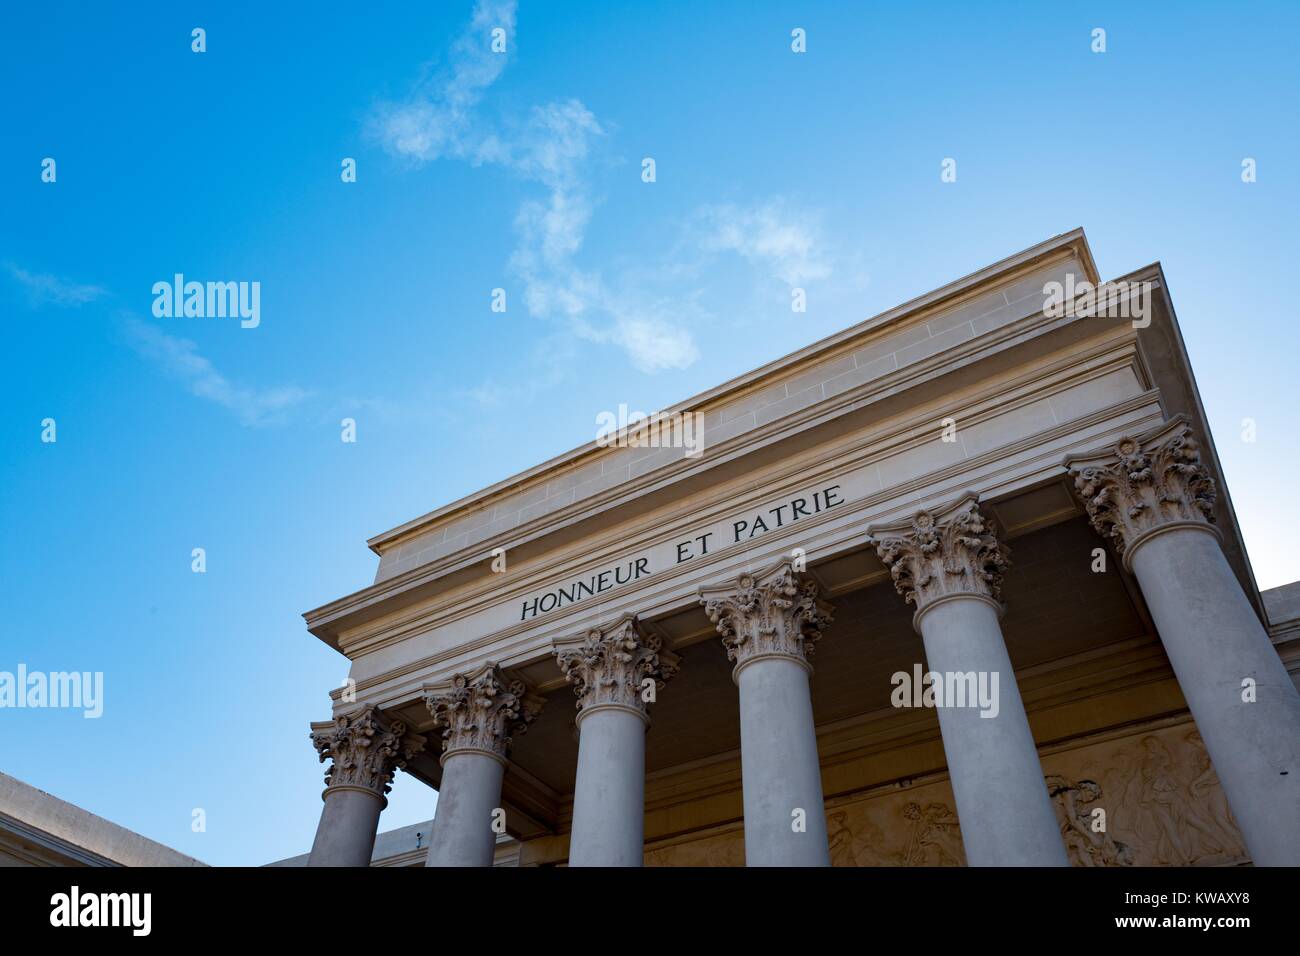 Entrance to the California Palace of the Legion of Honor art museum in the Lands End neighborhood of San Francisco, California, with inscription reading 'Honneur et Patrie' or 'Honor and Country', October 8, 2016. Stock Photo